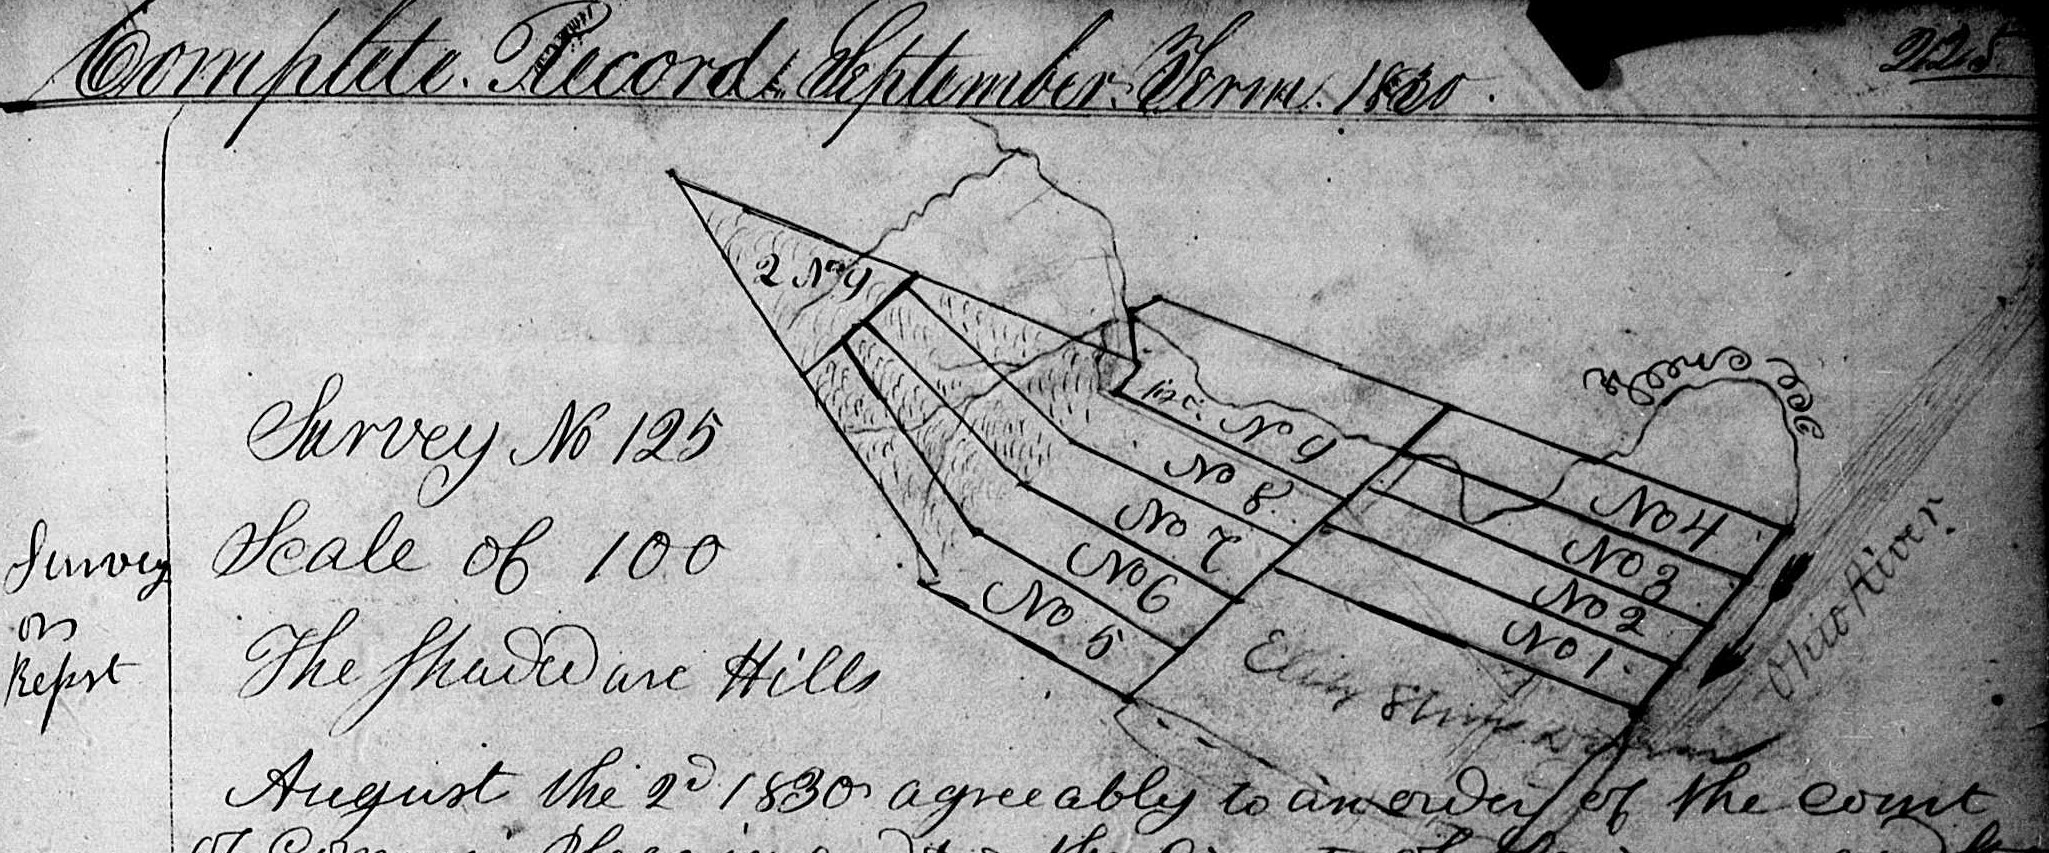 September Term 1830 Court of Common Pleas Complete Record Vol. 2, pages 221-227 Lawrence County, Ohio